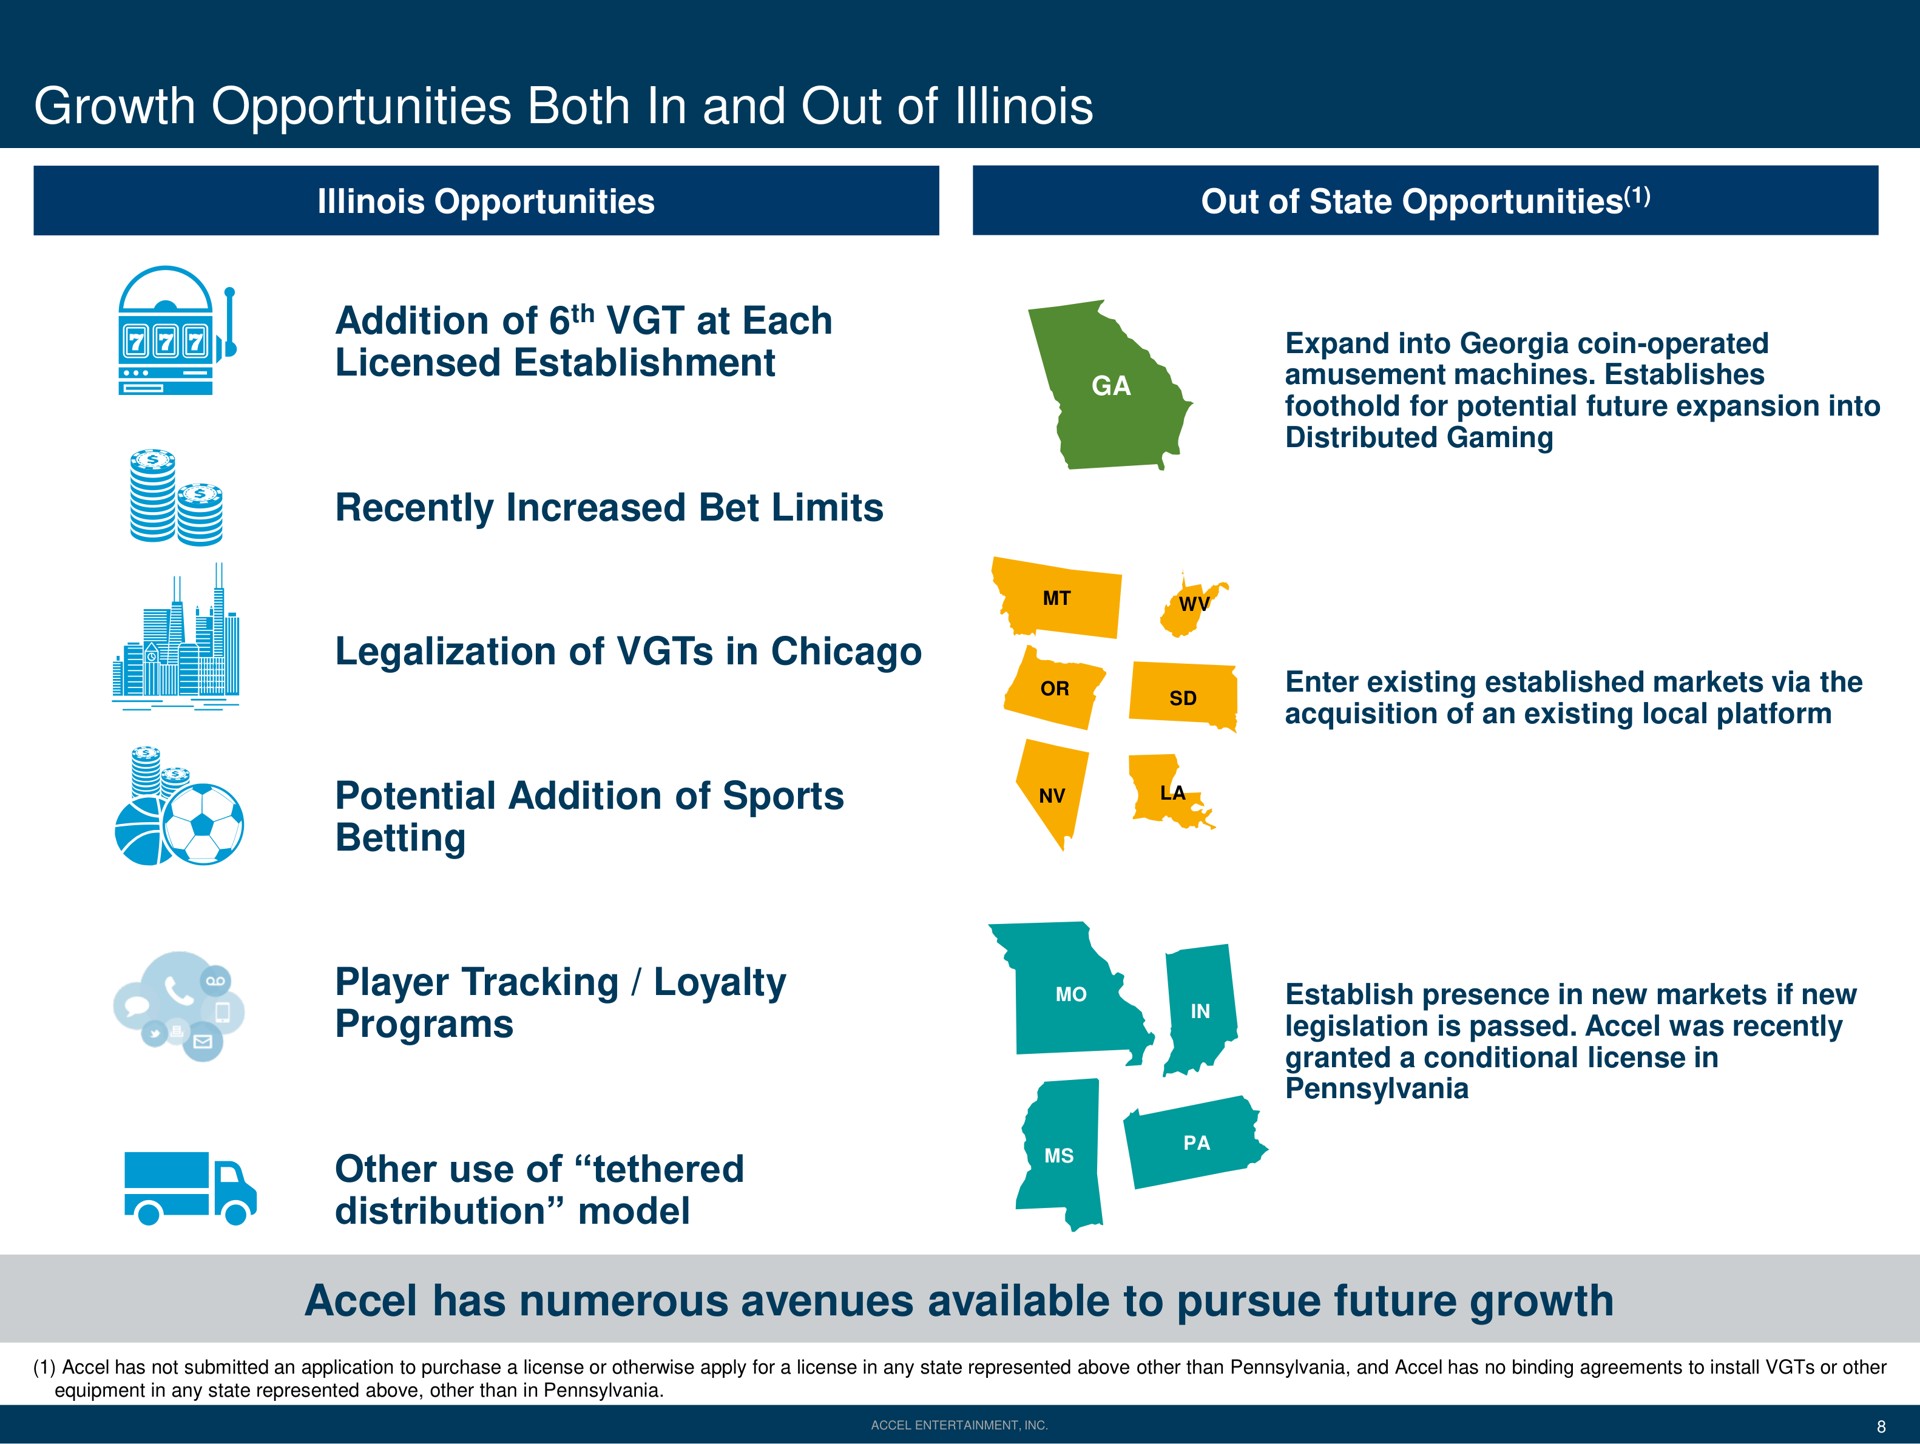 growth opportunities both in and out of addition of at each licensed establishment recently increased bet limits legalization of in potential addition of sports betting player tracking loyalty programs other use of tethered distribution model has numerous avenues available to pursue future growth state | Accel Entertaiment